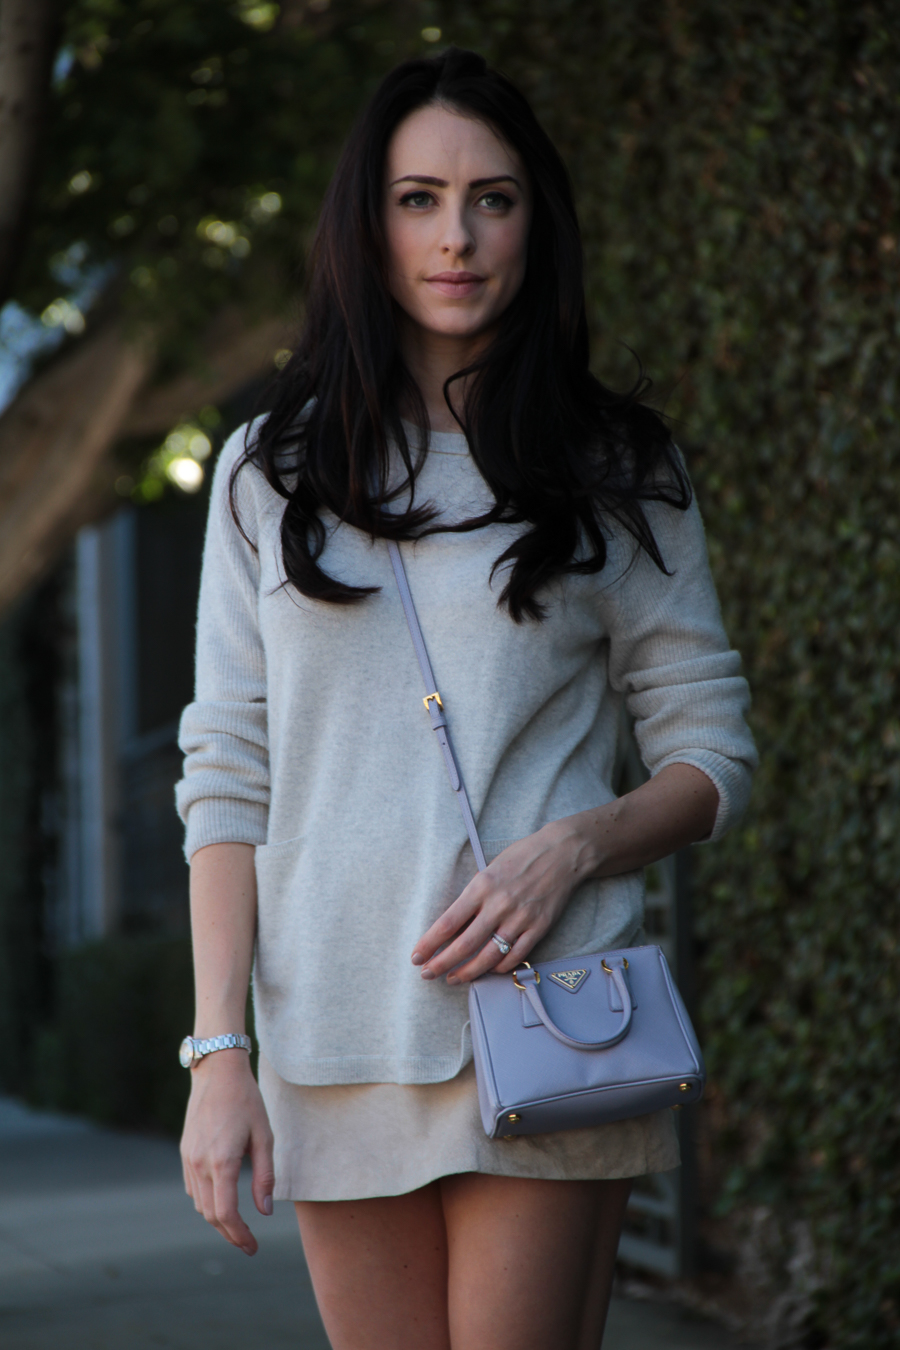 clutch and carry on - sabrina chakici - travel & style blog - LA street style - catherine taylor photography-18